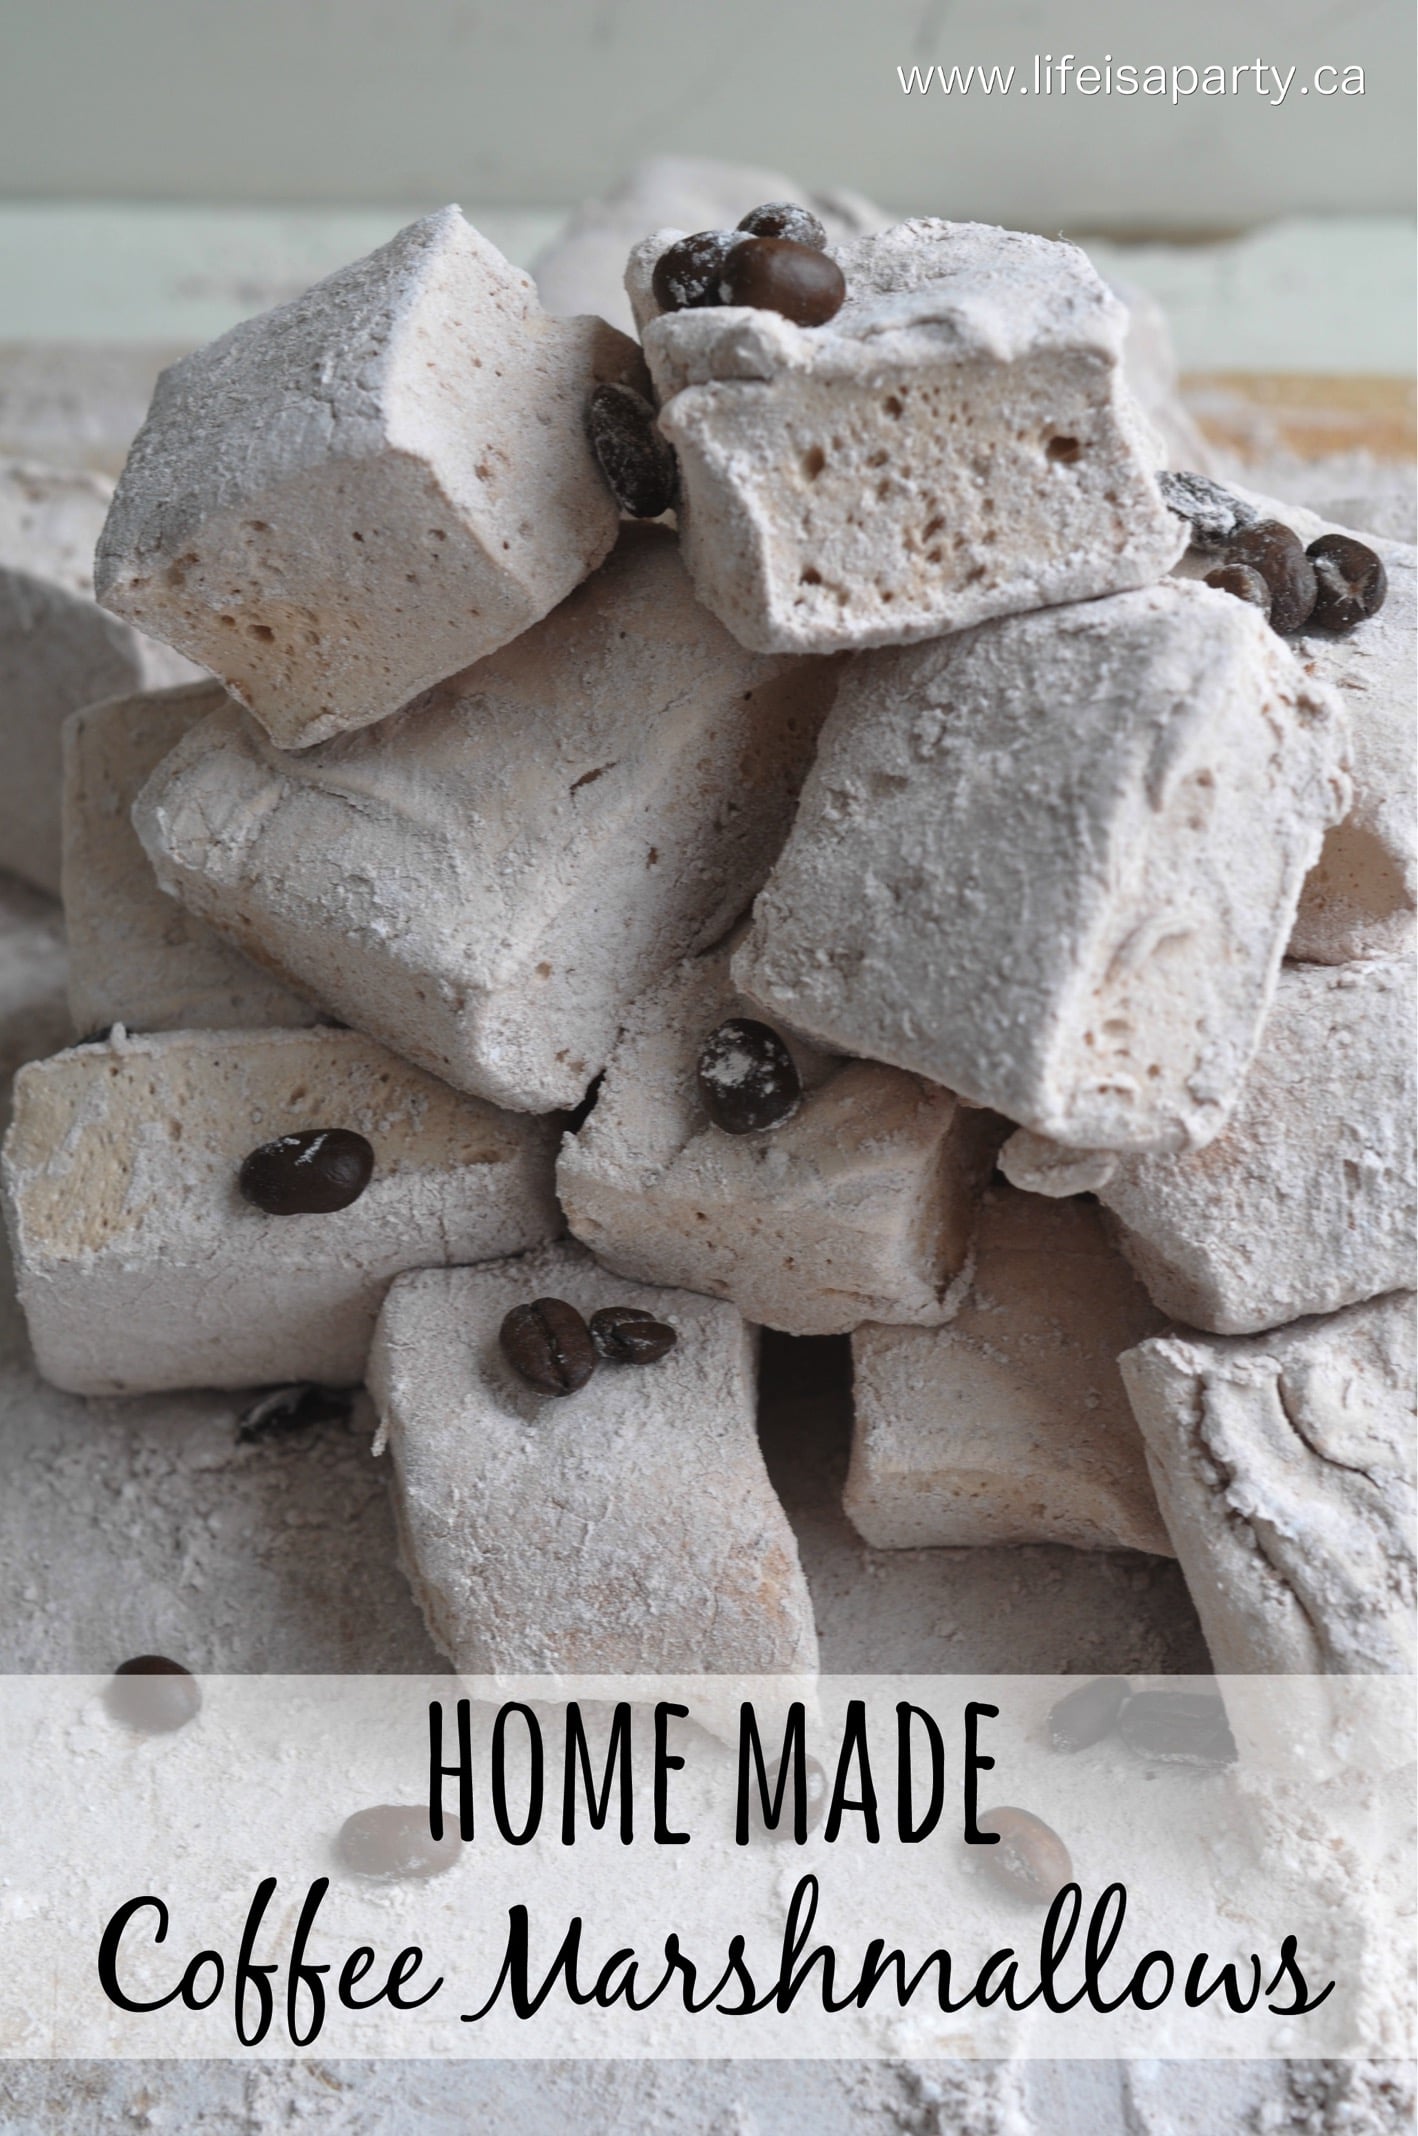 Homemade Coffee Marshmallows: Great recipe, perfect for gift giving. Add to your hot chocolate, or extra special s'mores, or dip in chocolate.